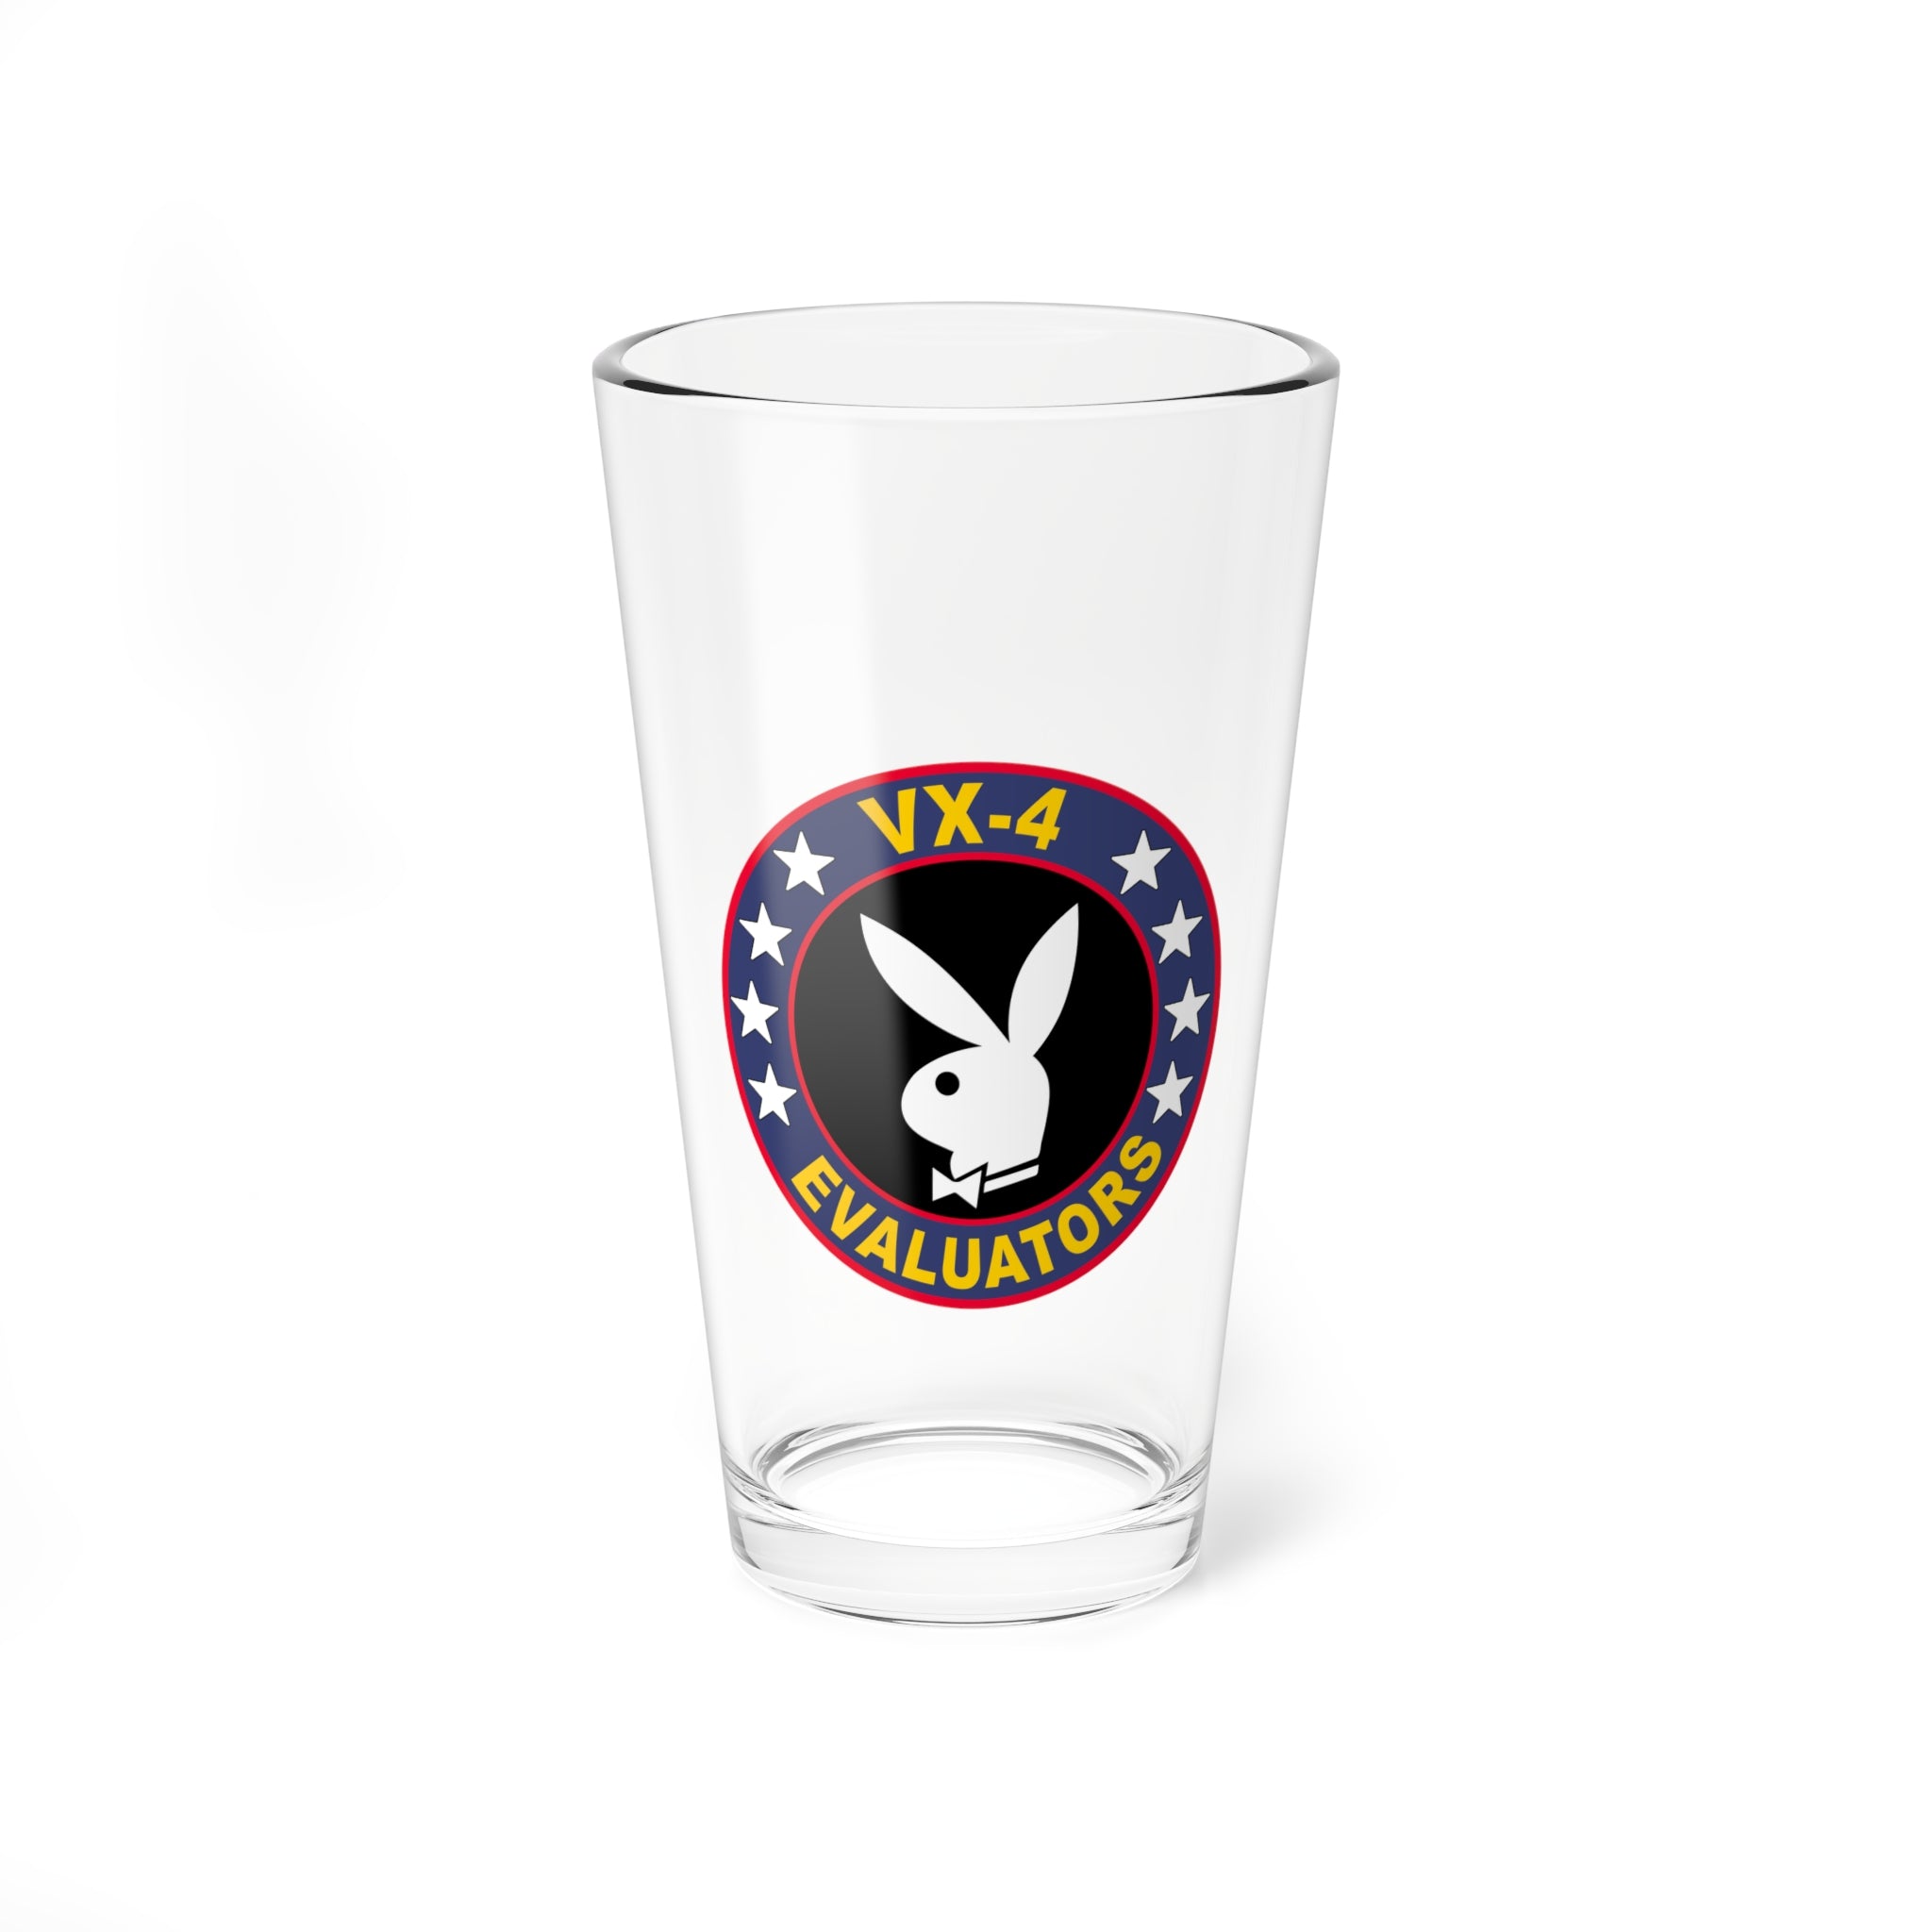 VX-4 "Evaluators" -no wings- Pint Glass, Navy, Strike Fighter Test and Evaluation Squadron